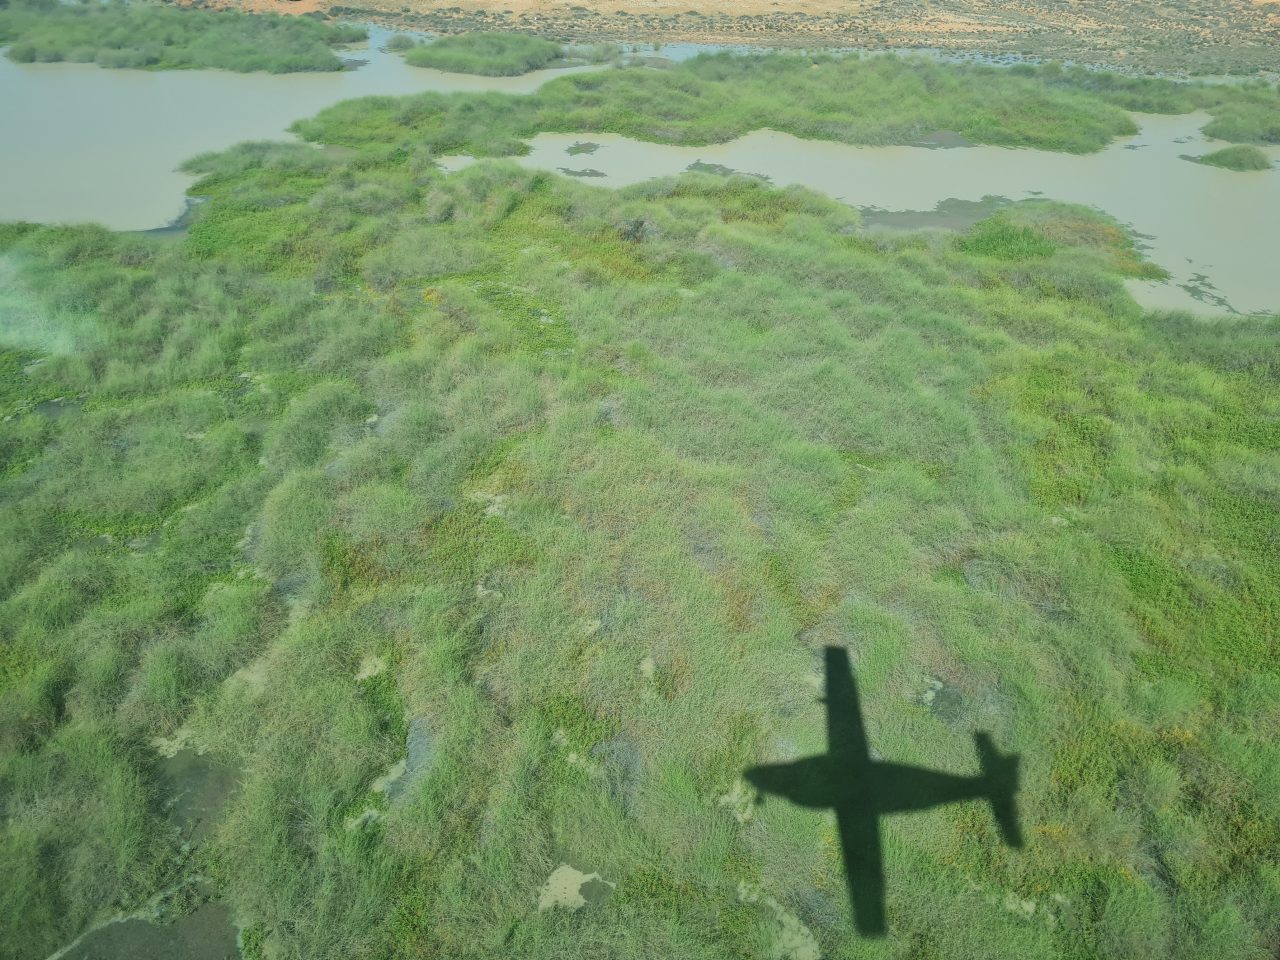 Aerial photo of a lake with lush green vegetation growing on islands in the lake. Contrasting orange sandy soil at lake edge in background. Shadow of plane in foreground.